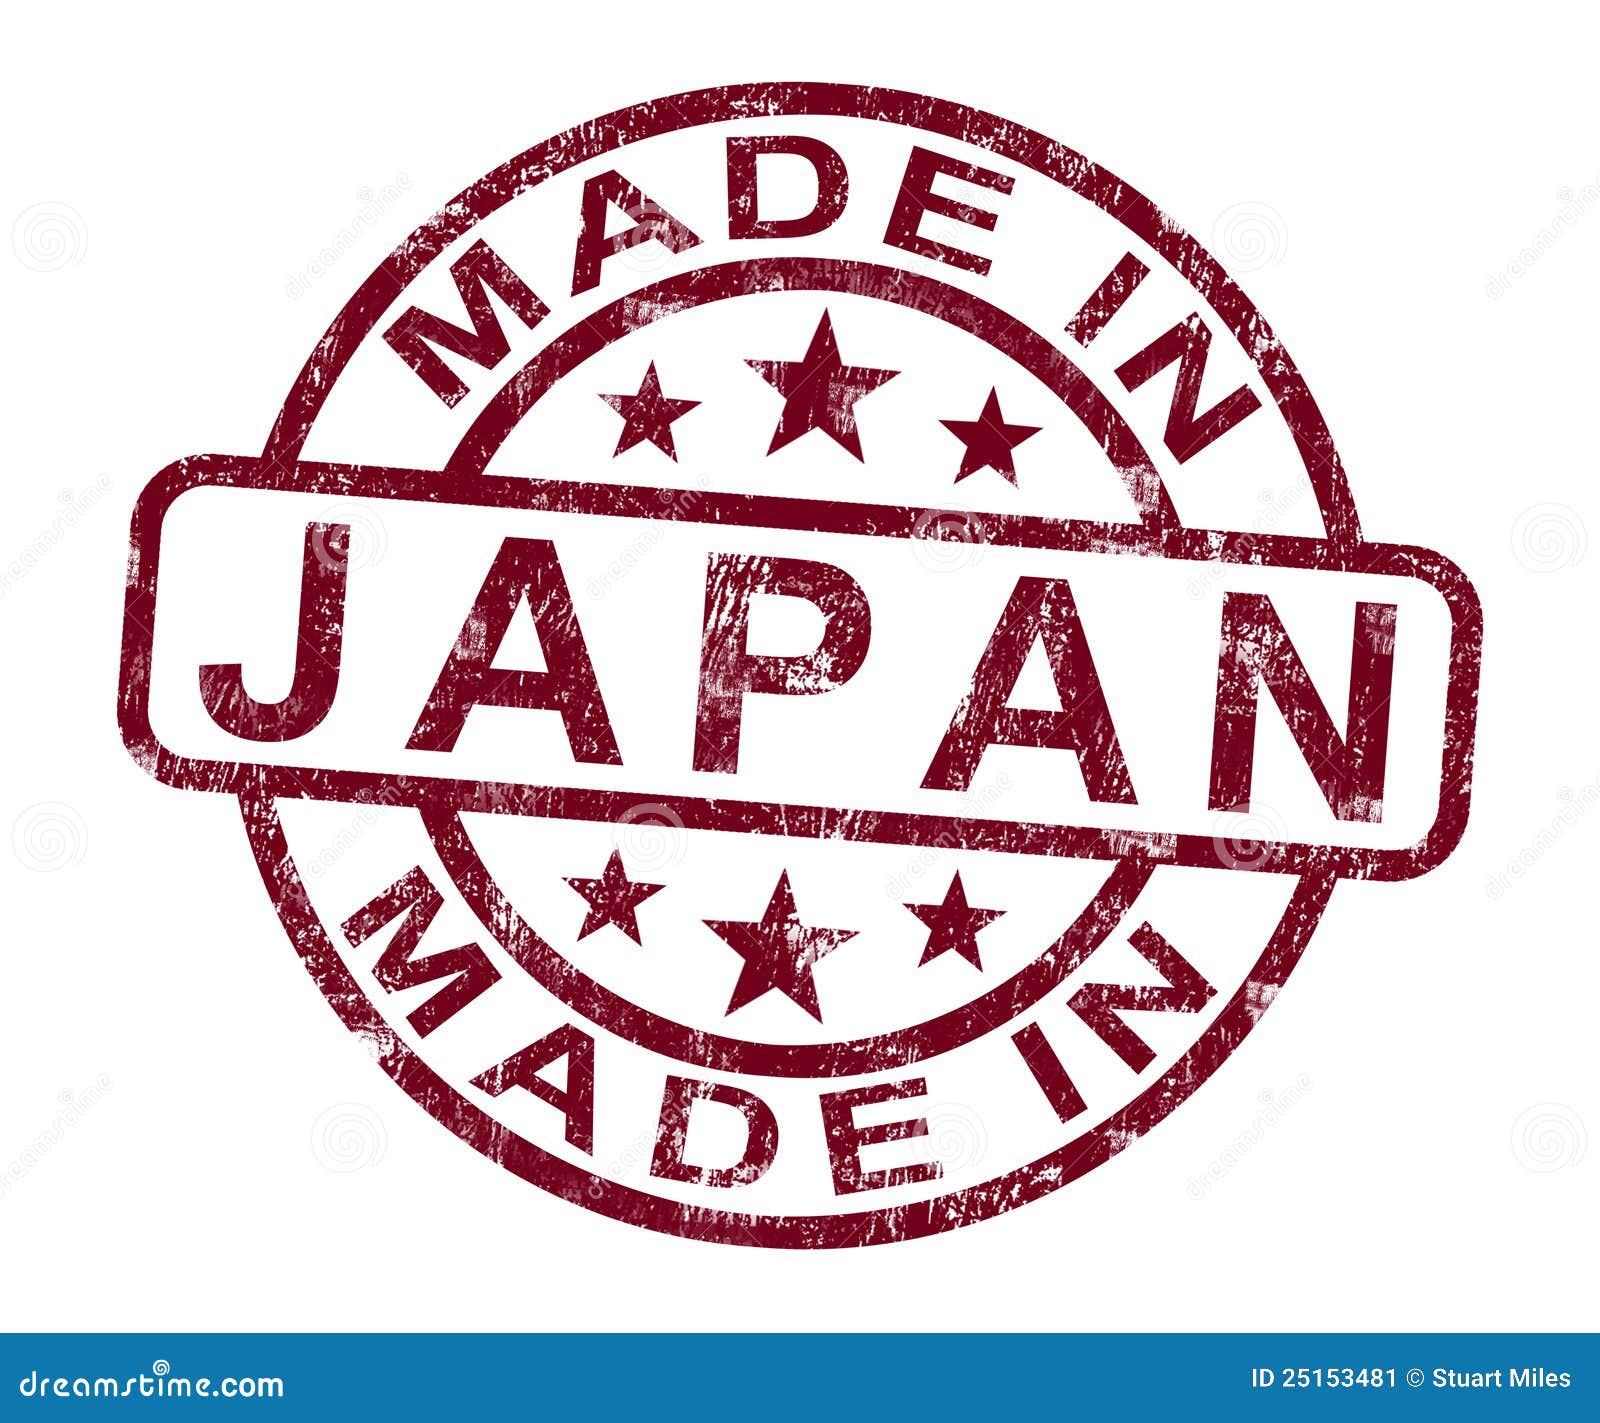 Are you made in japan